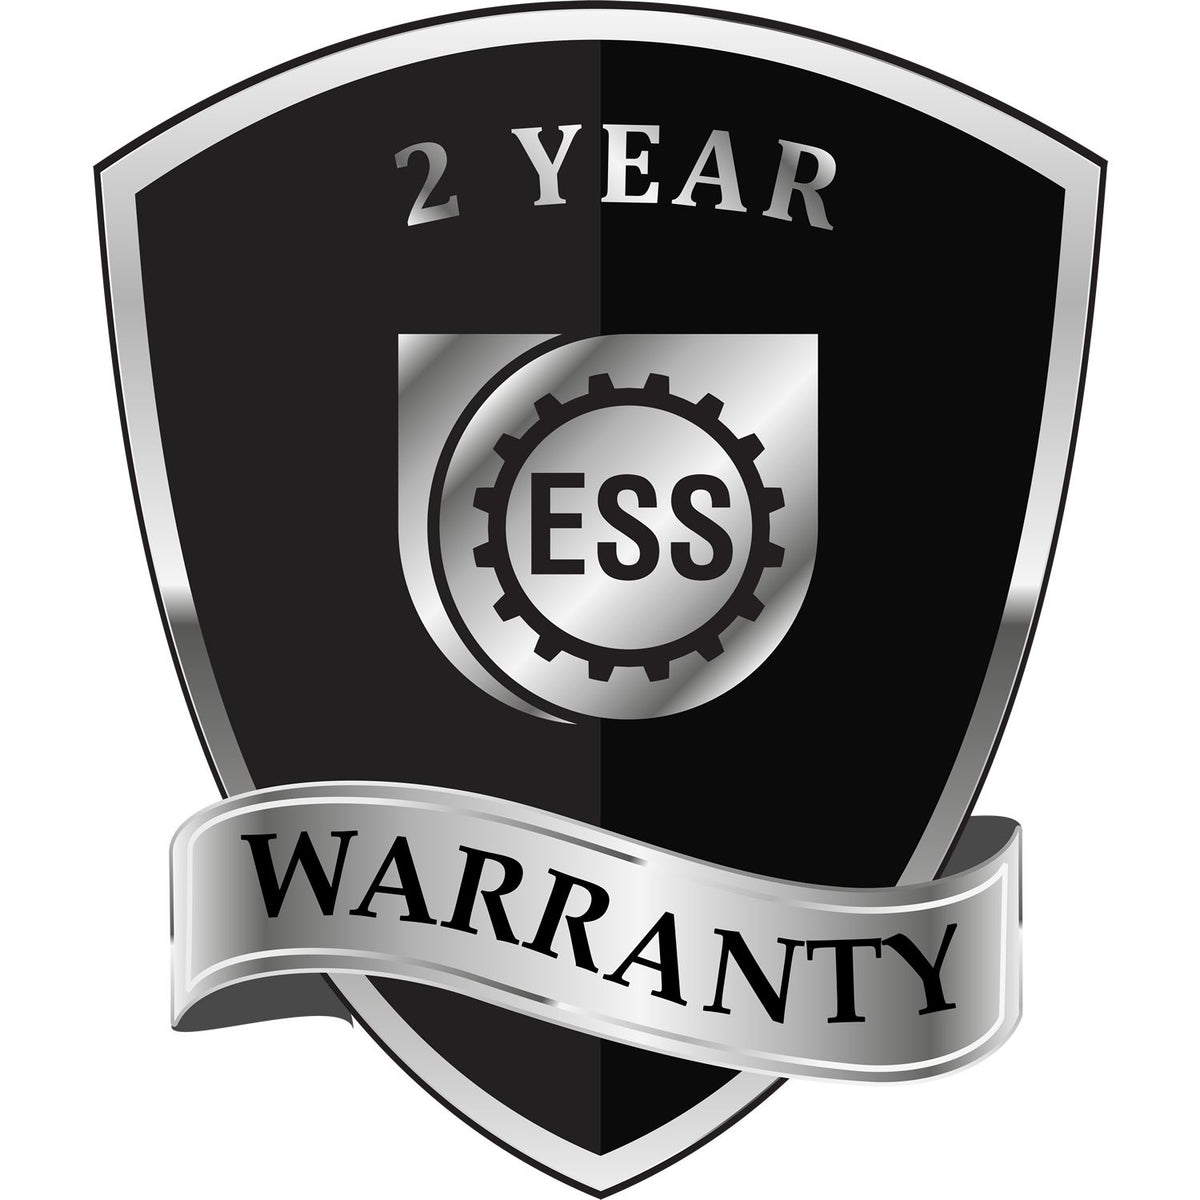 A black and silver badge or emblem showing warranty information for the Gift New Mexico Geologist Seal